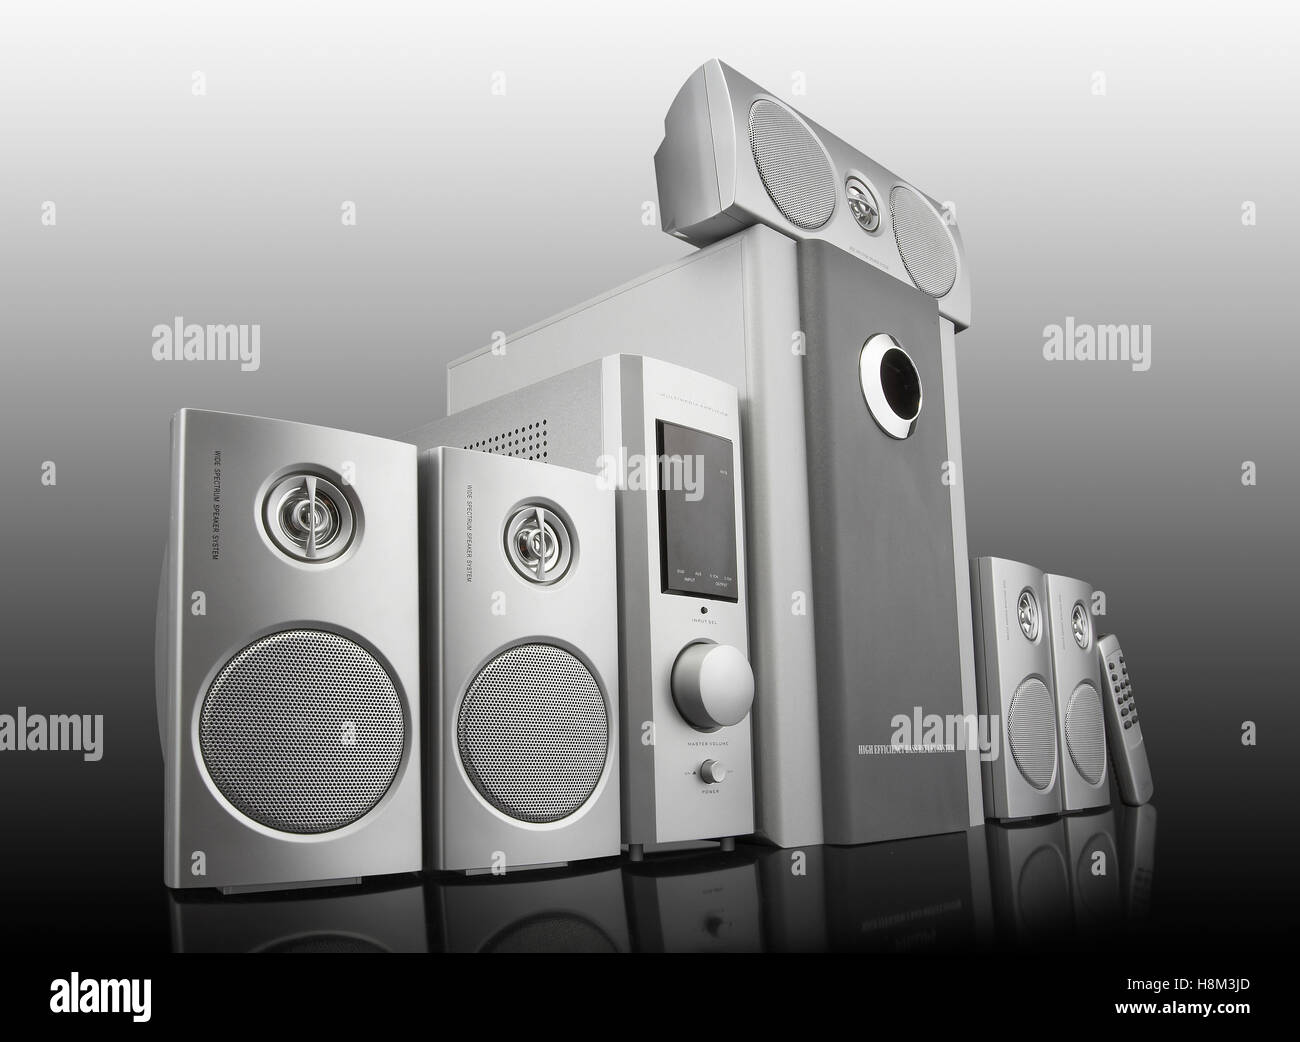 Home theater music system Stock Photo